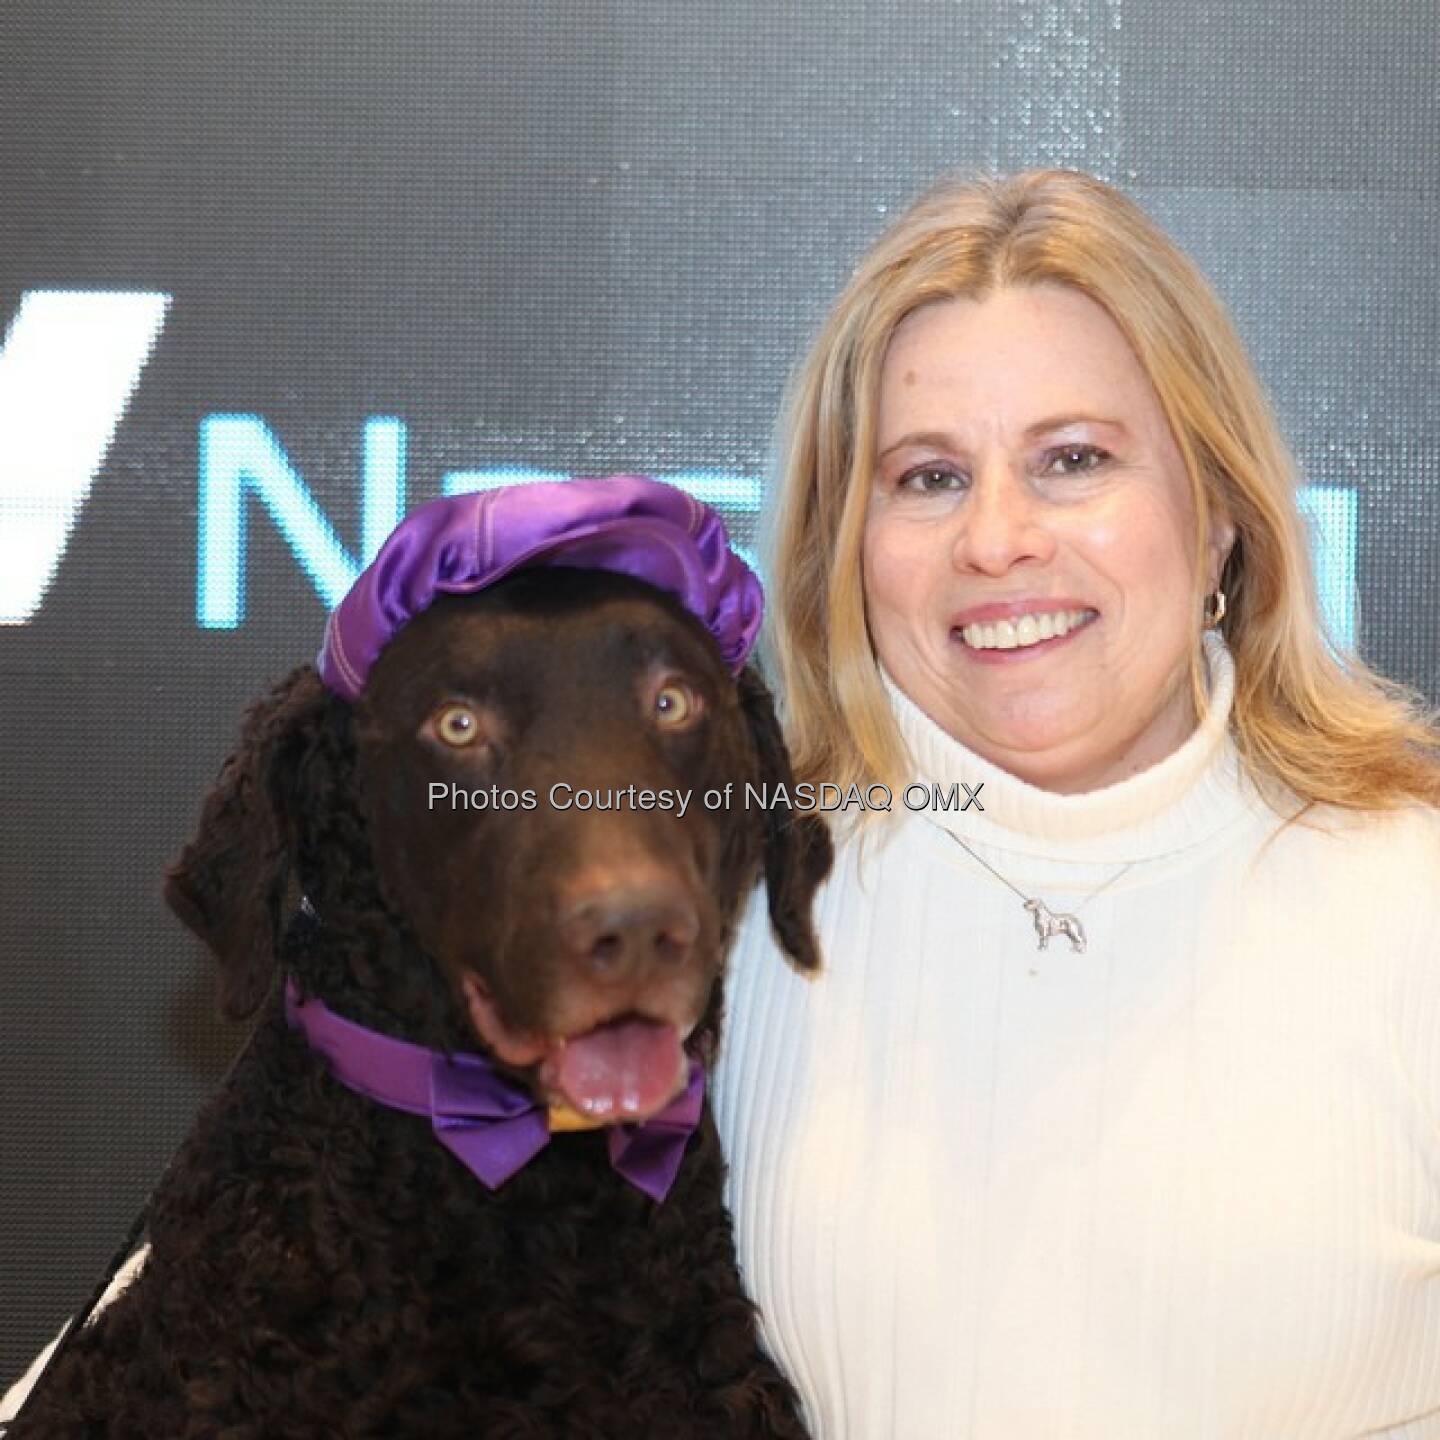 Hund: Woof woof! The 139th Annual Westminster Dog Show rang the @Nasdaq Closing Bell! #dogs #puppies #dog #dogsofinstagram #pup #westminsterdogshow @westminsterkennelclub  Source: http://facebook.com/NASDAQ